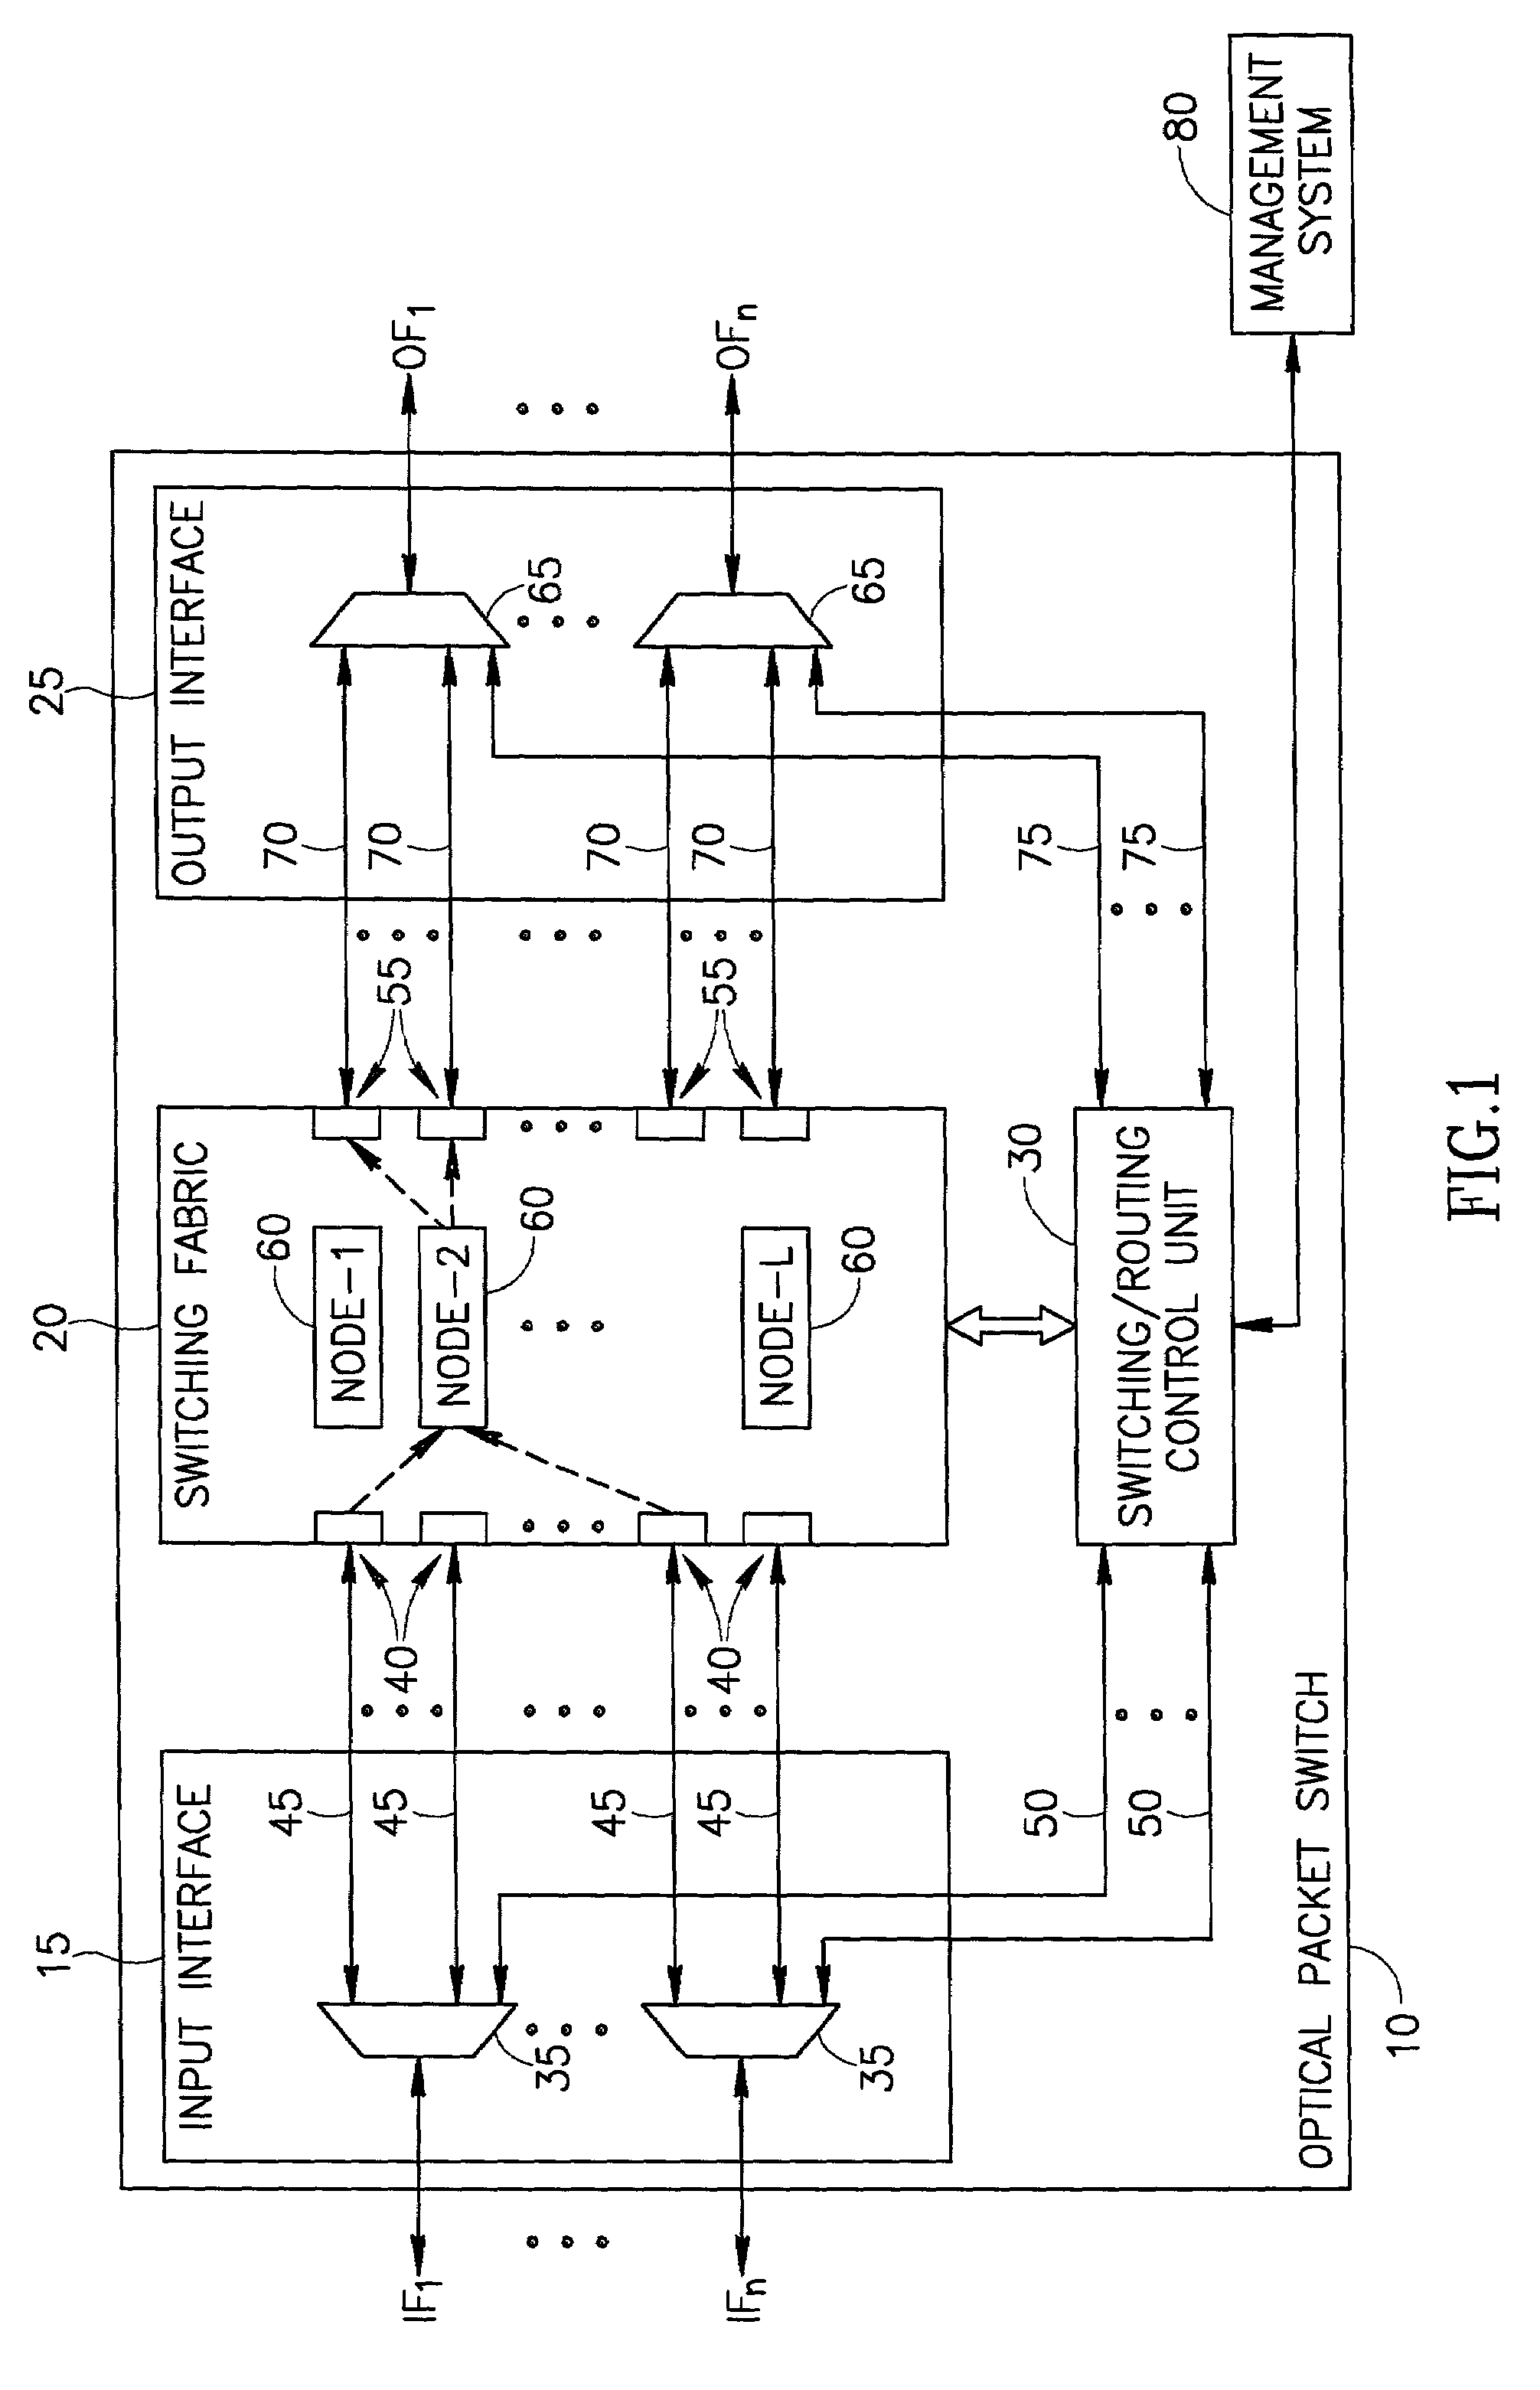 Optical packet switching apparatus and methods